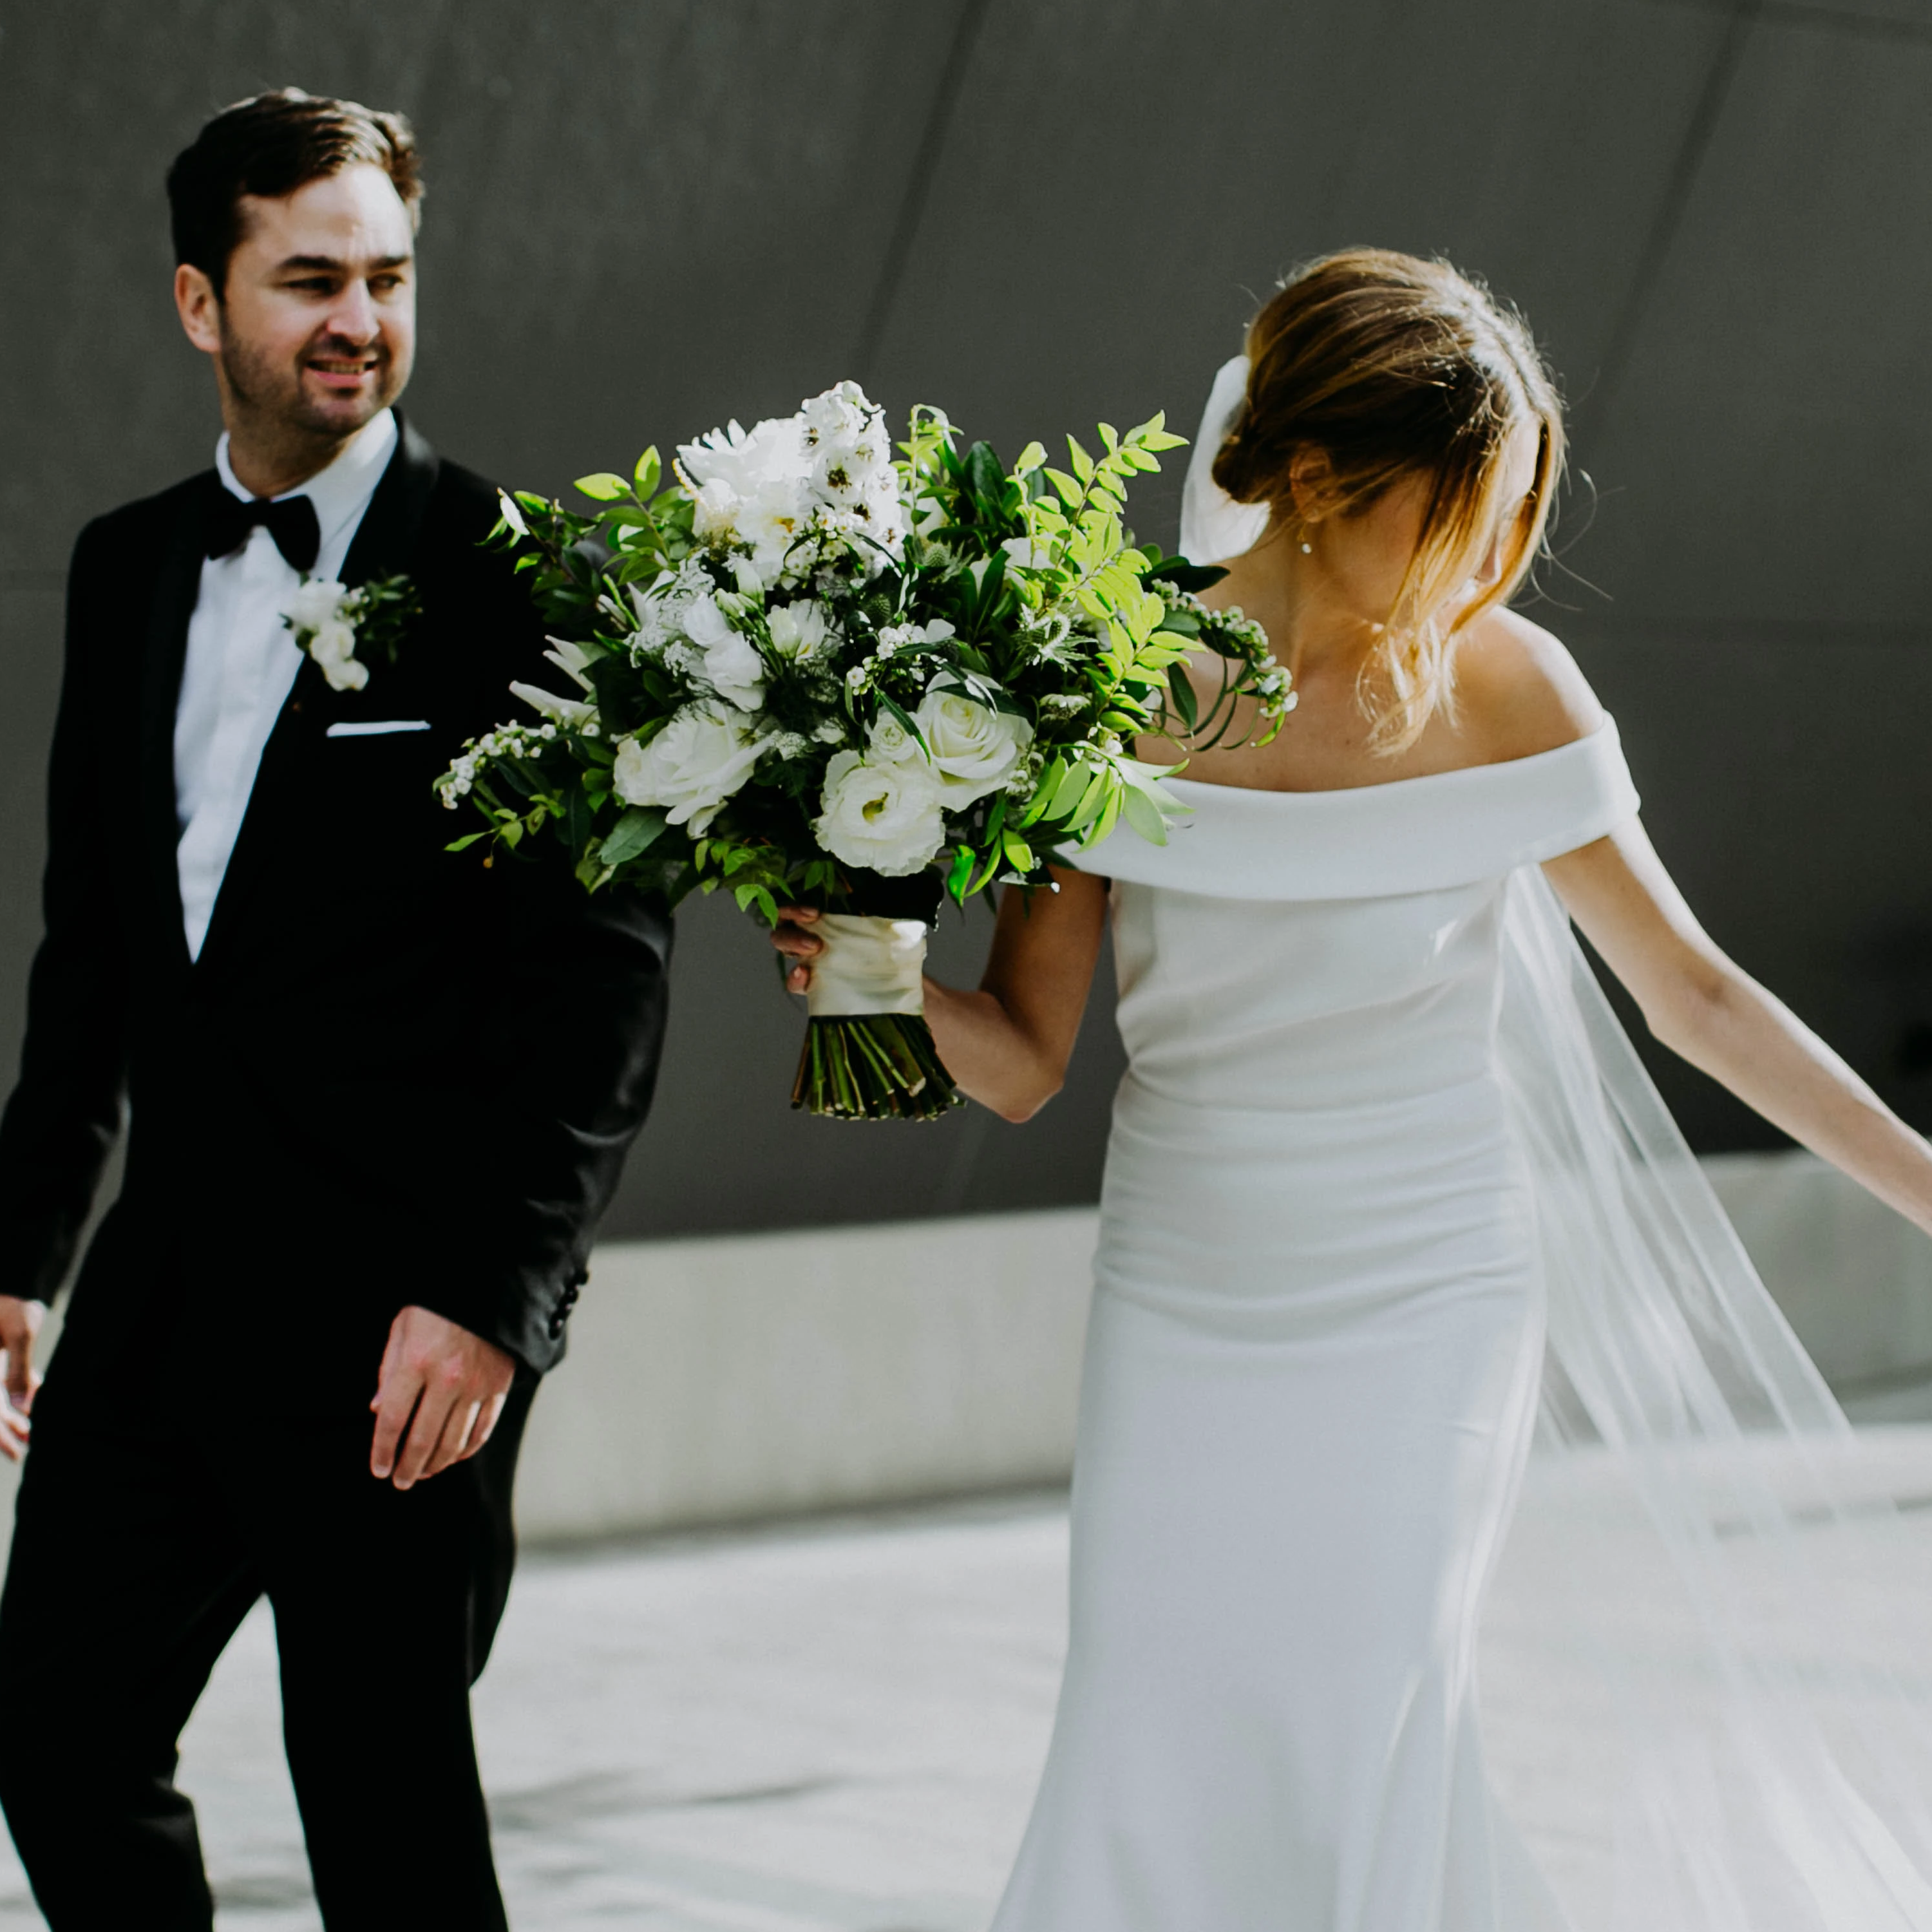 Bride and groom walking in the city, bride holds a large white and green bouquet